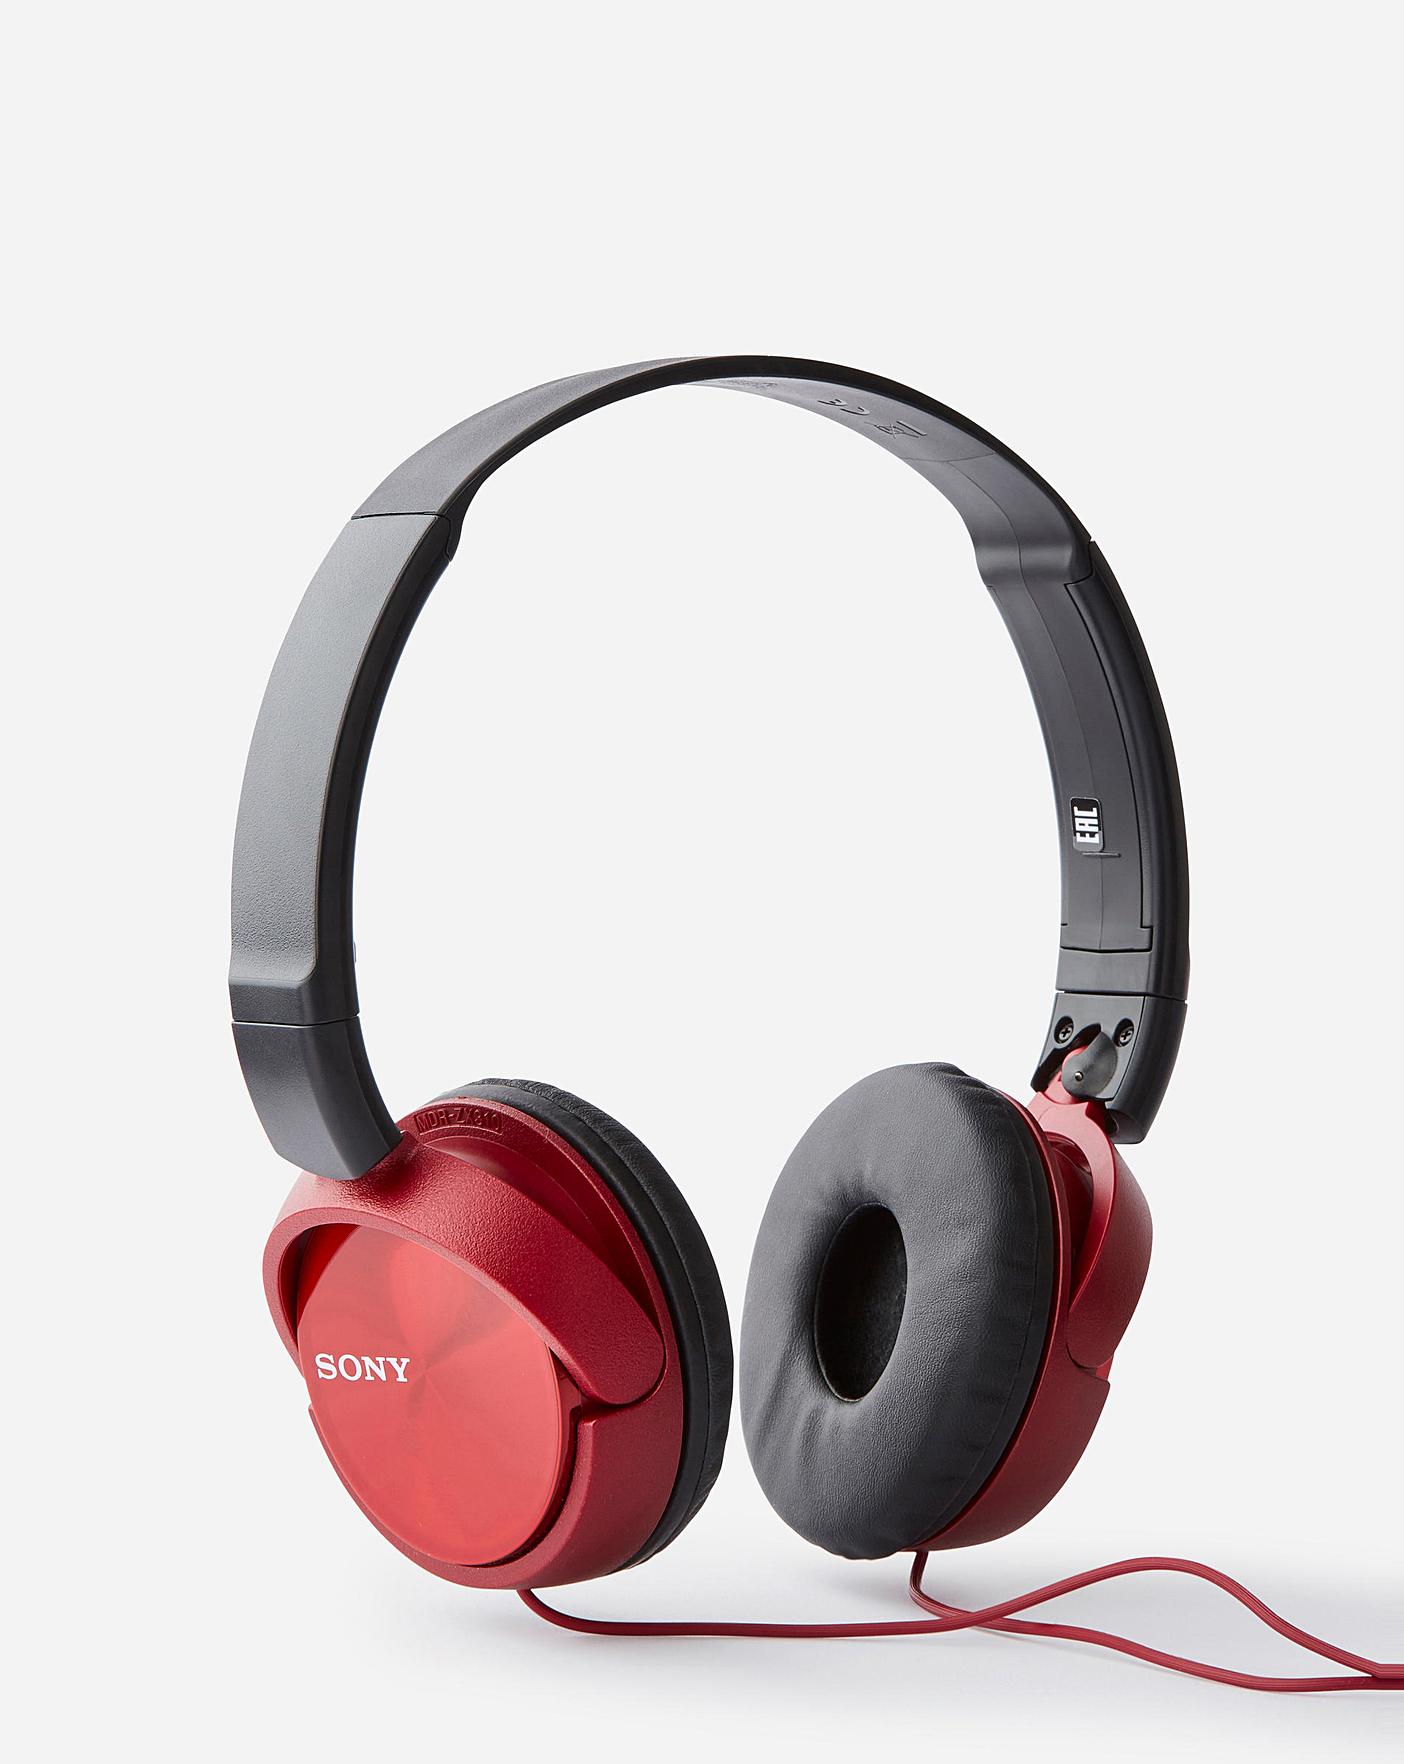 Sony MDR-ZX310 Over ear Headphones Red | Premier Man